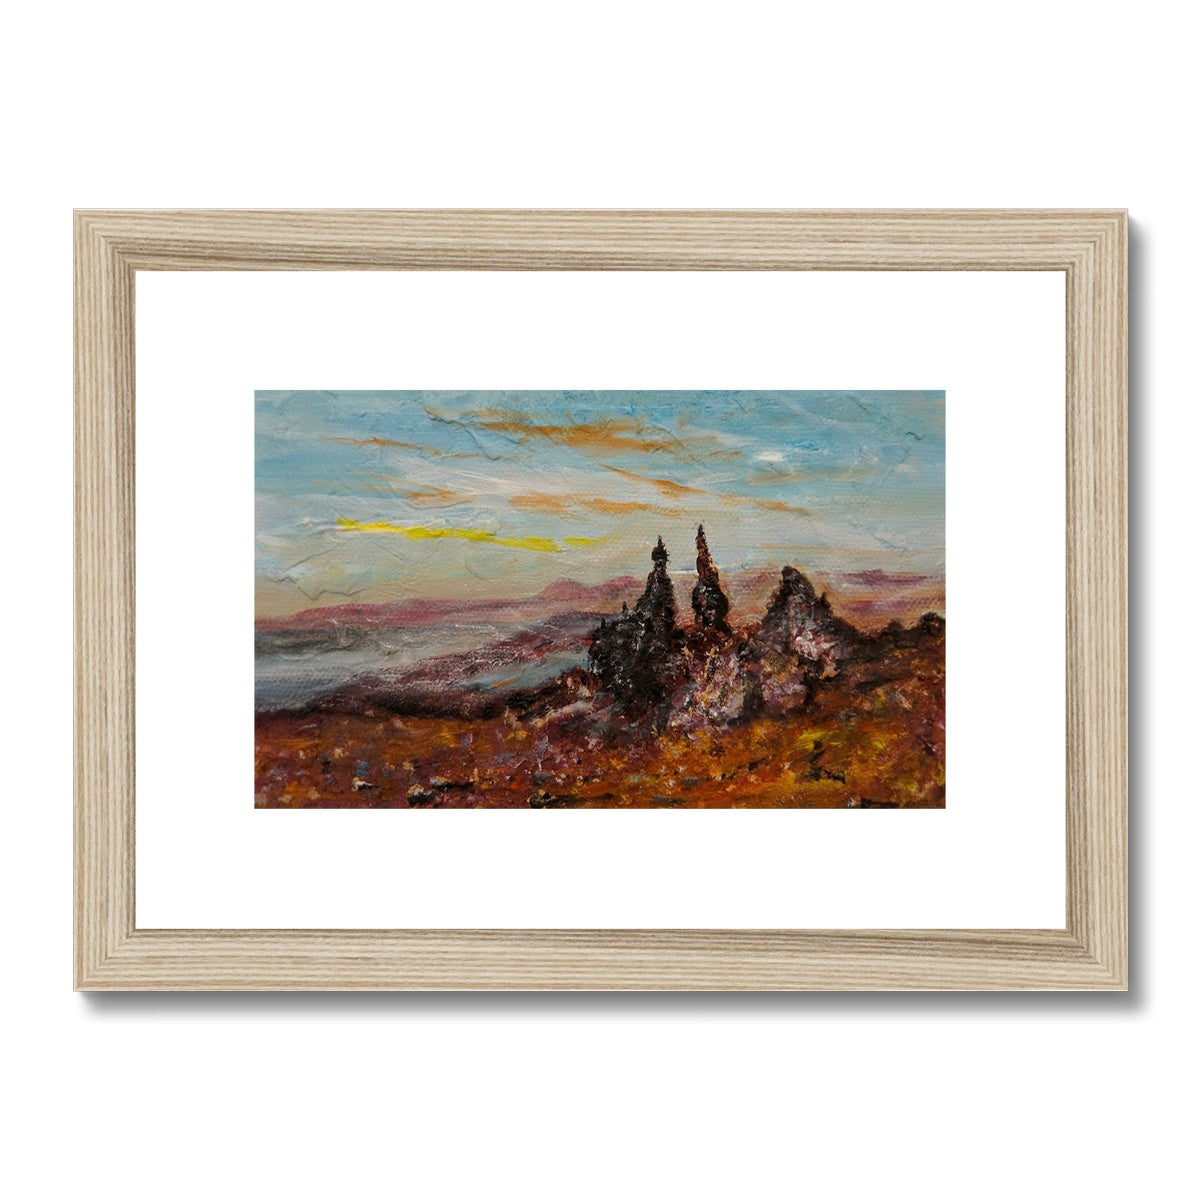 The Storr Skye Painting | Framed & Mounted Prints From Scotland-Framed & Mounted Prints-Skye Art Gallery-A4 Landscape-Natural Frame-Paintings, Prints, Homeware, Art Gifts From Scotland By Scottish Artist Kevin Hunter